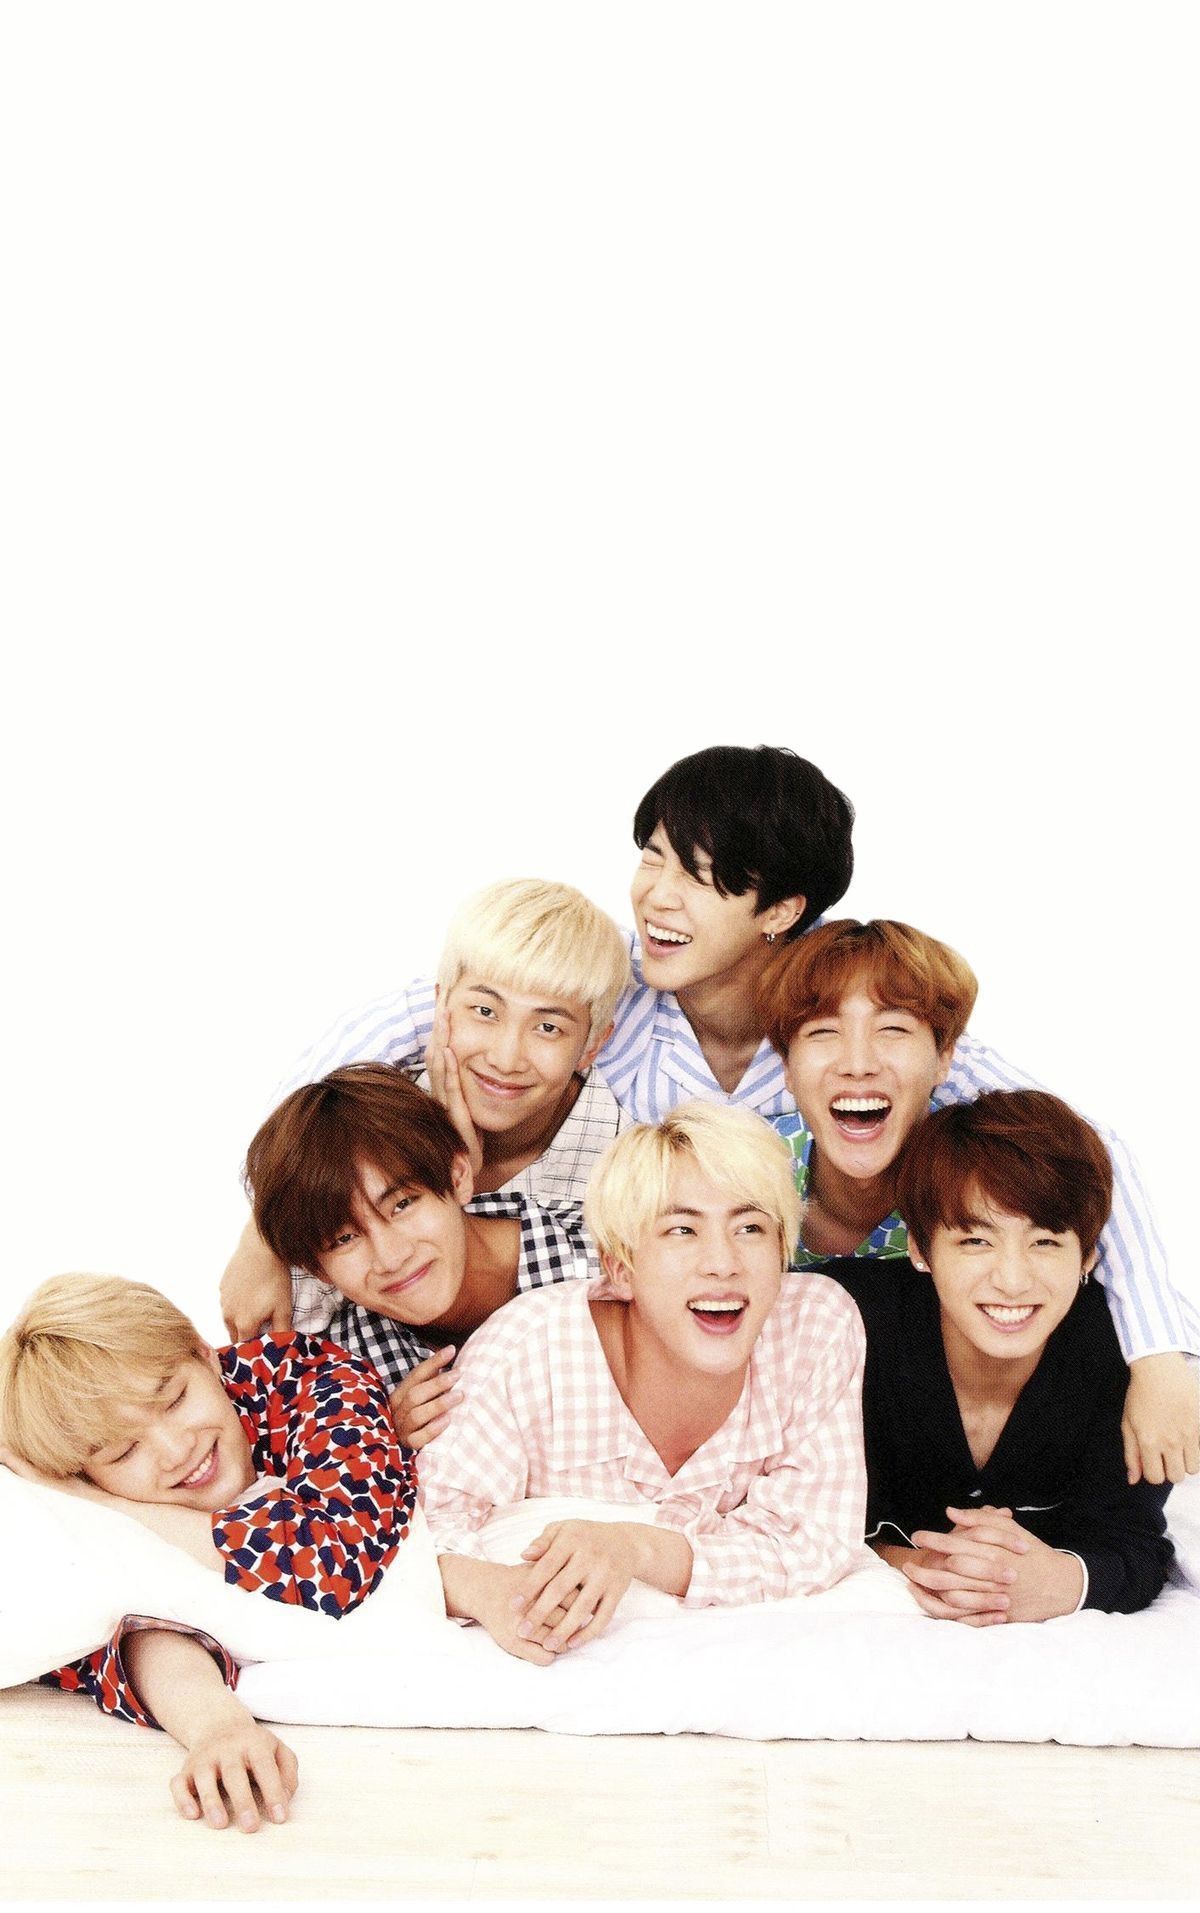 BTS WALLPAPERS ™ HAPPY 5TH ANNIVERSARY